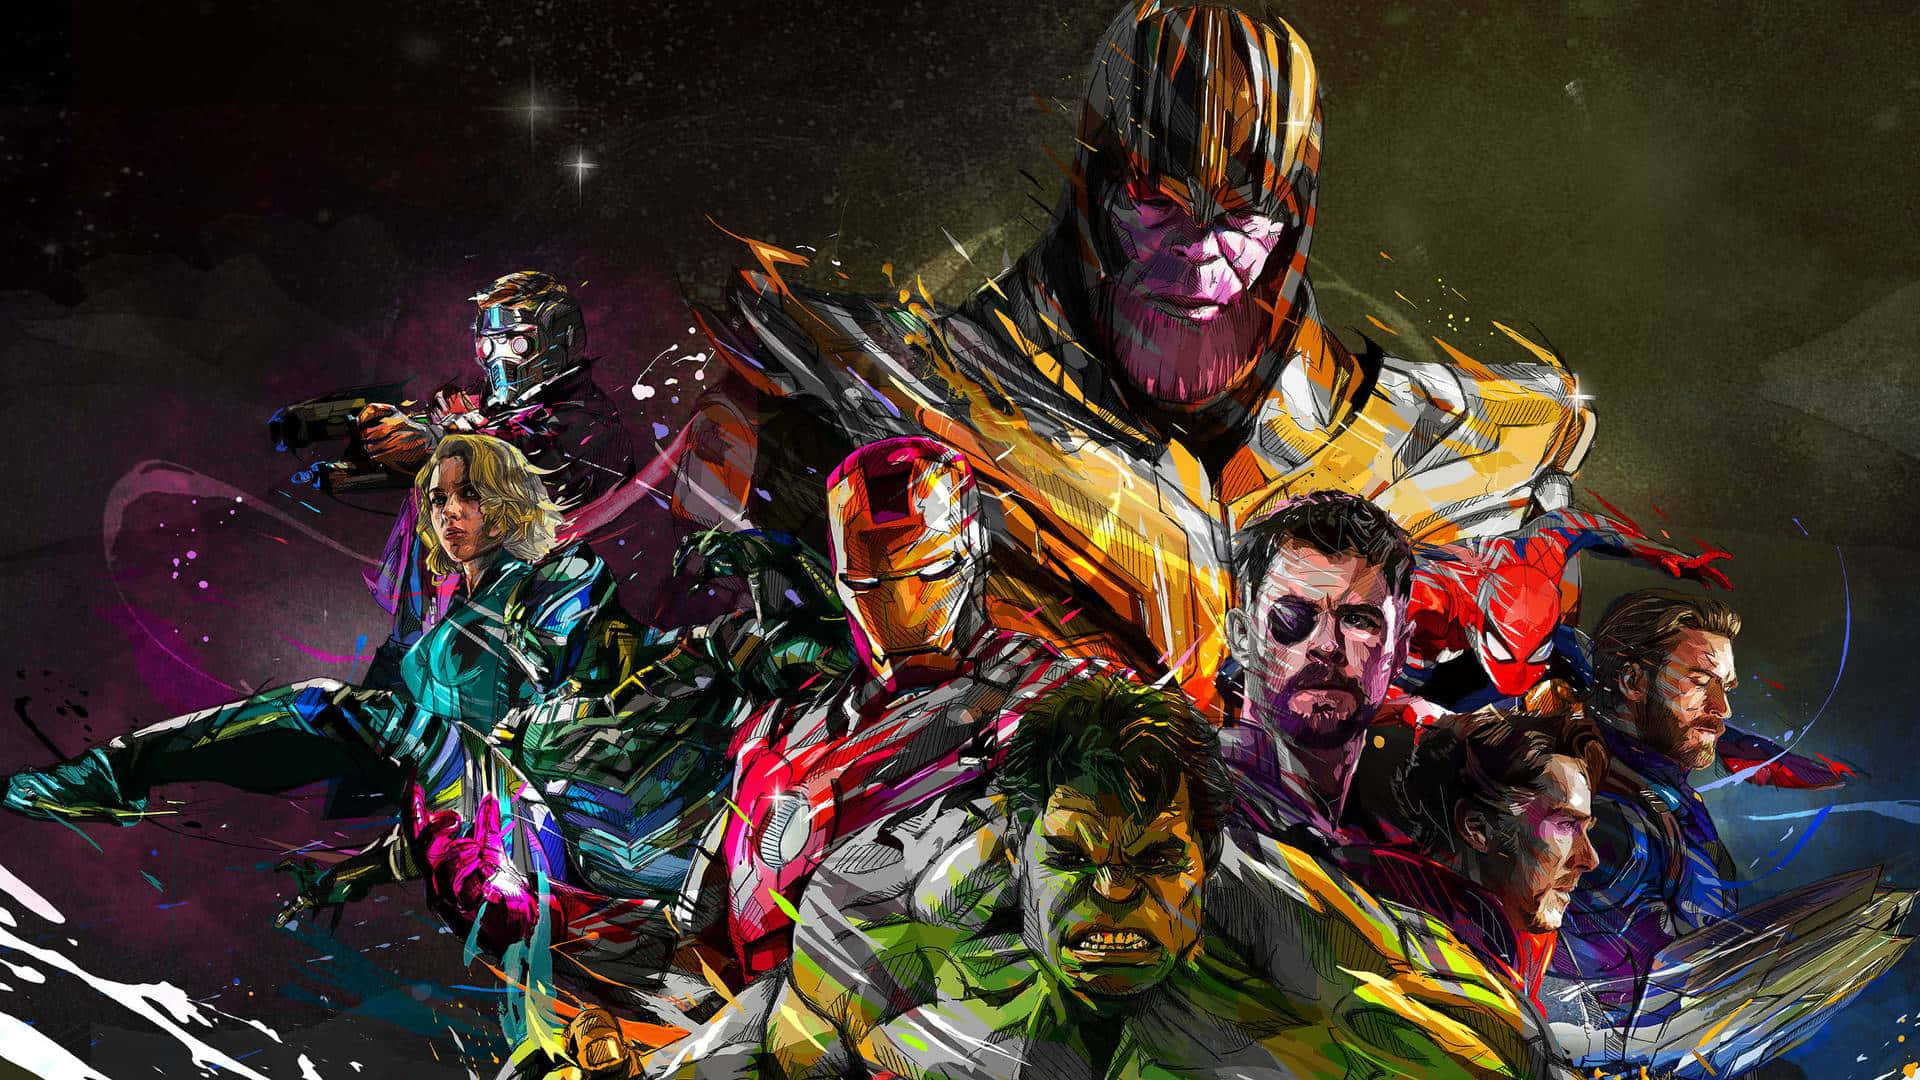 Get Ready to Defend the Universe with the Avengers Laptop Wallpaper